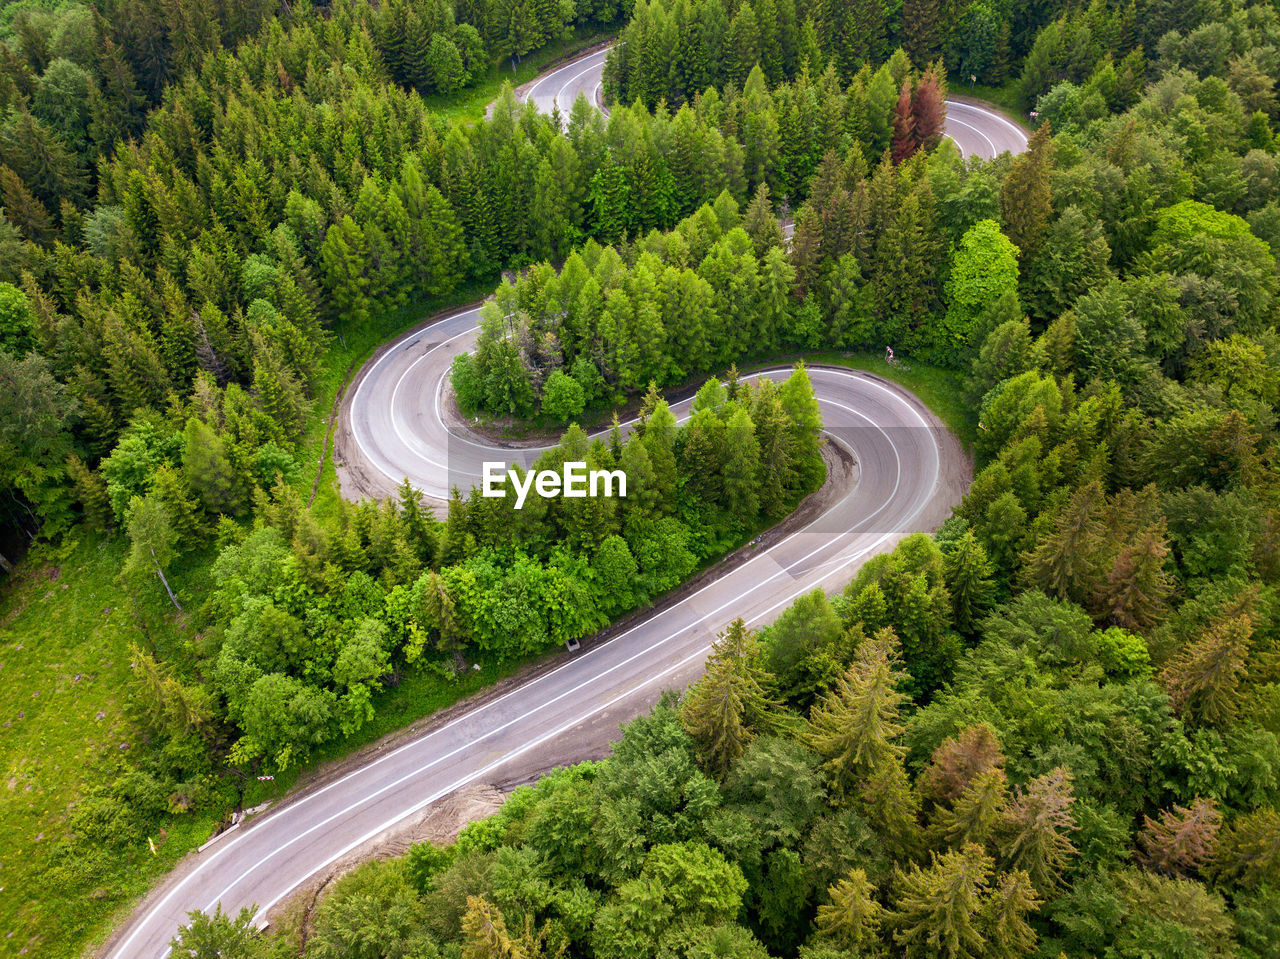 plant, tree, green, road, forest, transportation, land, high angle view, aerial photography, scenics - nature, growth, beauty in nature, landscape, environment, nature, no people, aerial view, curve, tranquility, non-urban scene, outdoors, foliage, travel, day, lush foliage, highway, tranquil scene, infrastructure, woodland, mountain pass, mode of transportation, architecture, winding road, mountain, motor vehicle, rural scene, social issues, idyllic